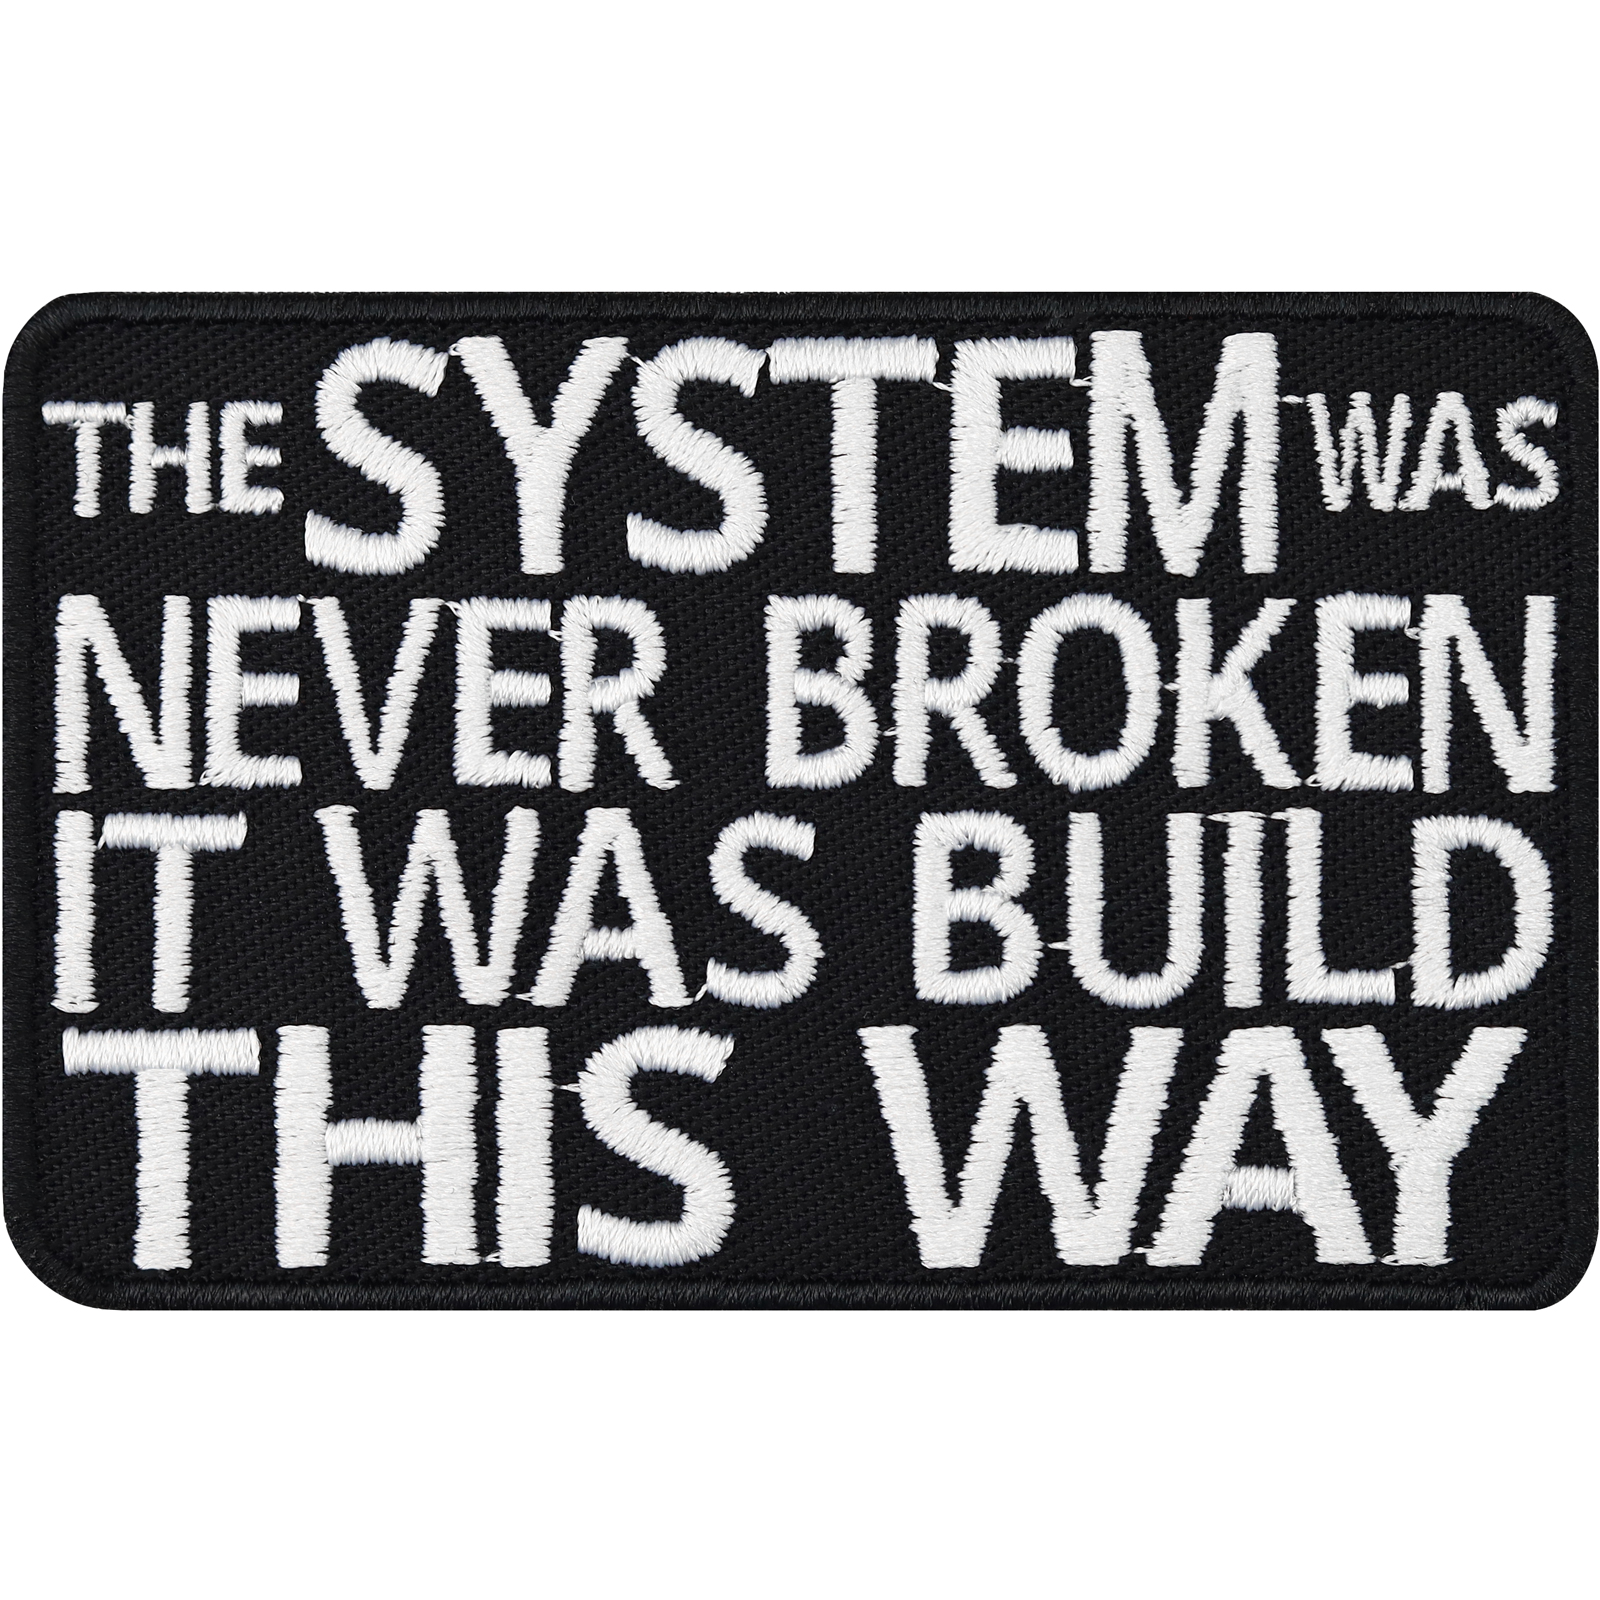 The system was never broken, it was build this way - Patch